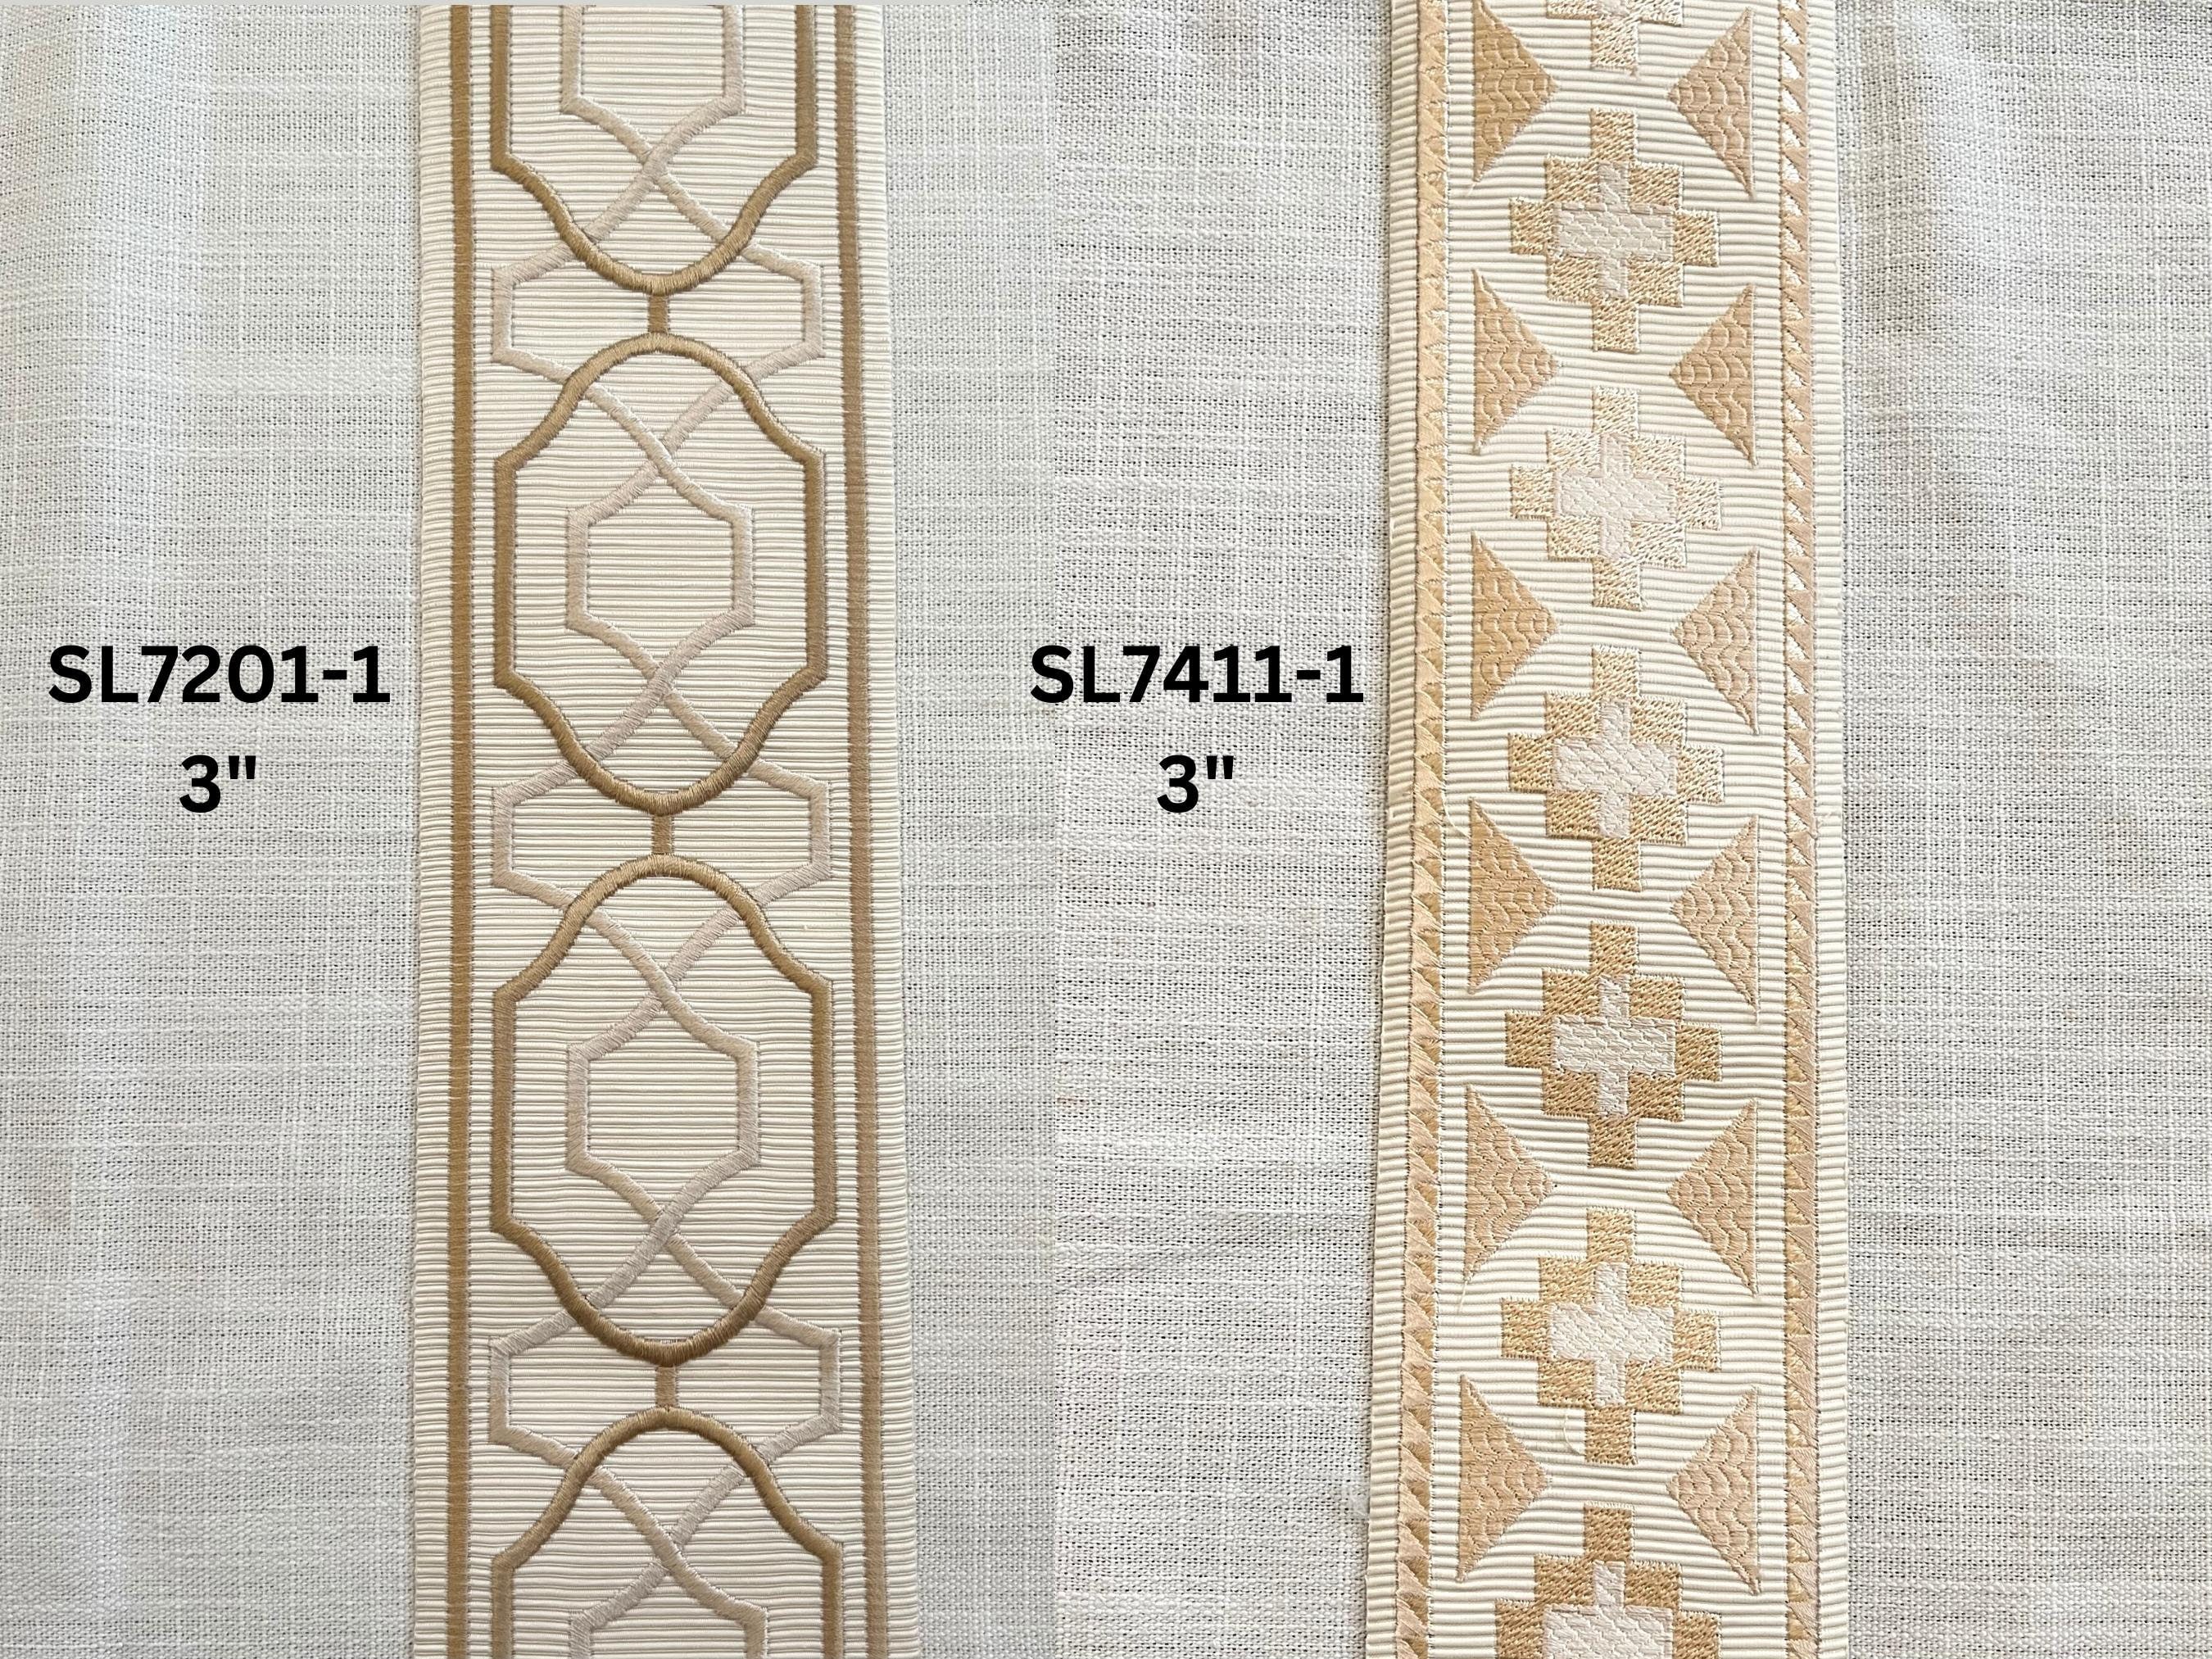 Beige Taupe Decorative Trims for Drapery, Curtain Tapes, Upholstery Ribbon,  Pillow Border, Sold by the Yard - Etsy